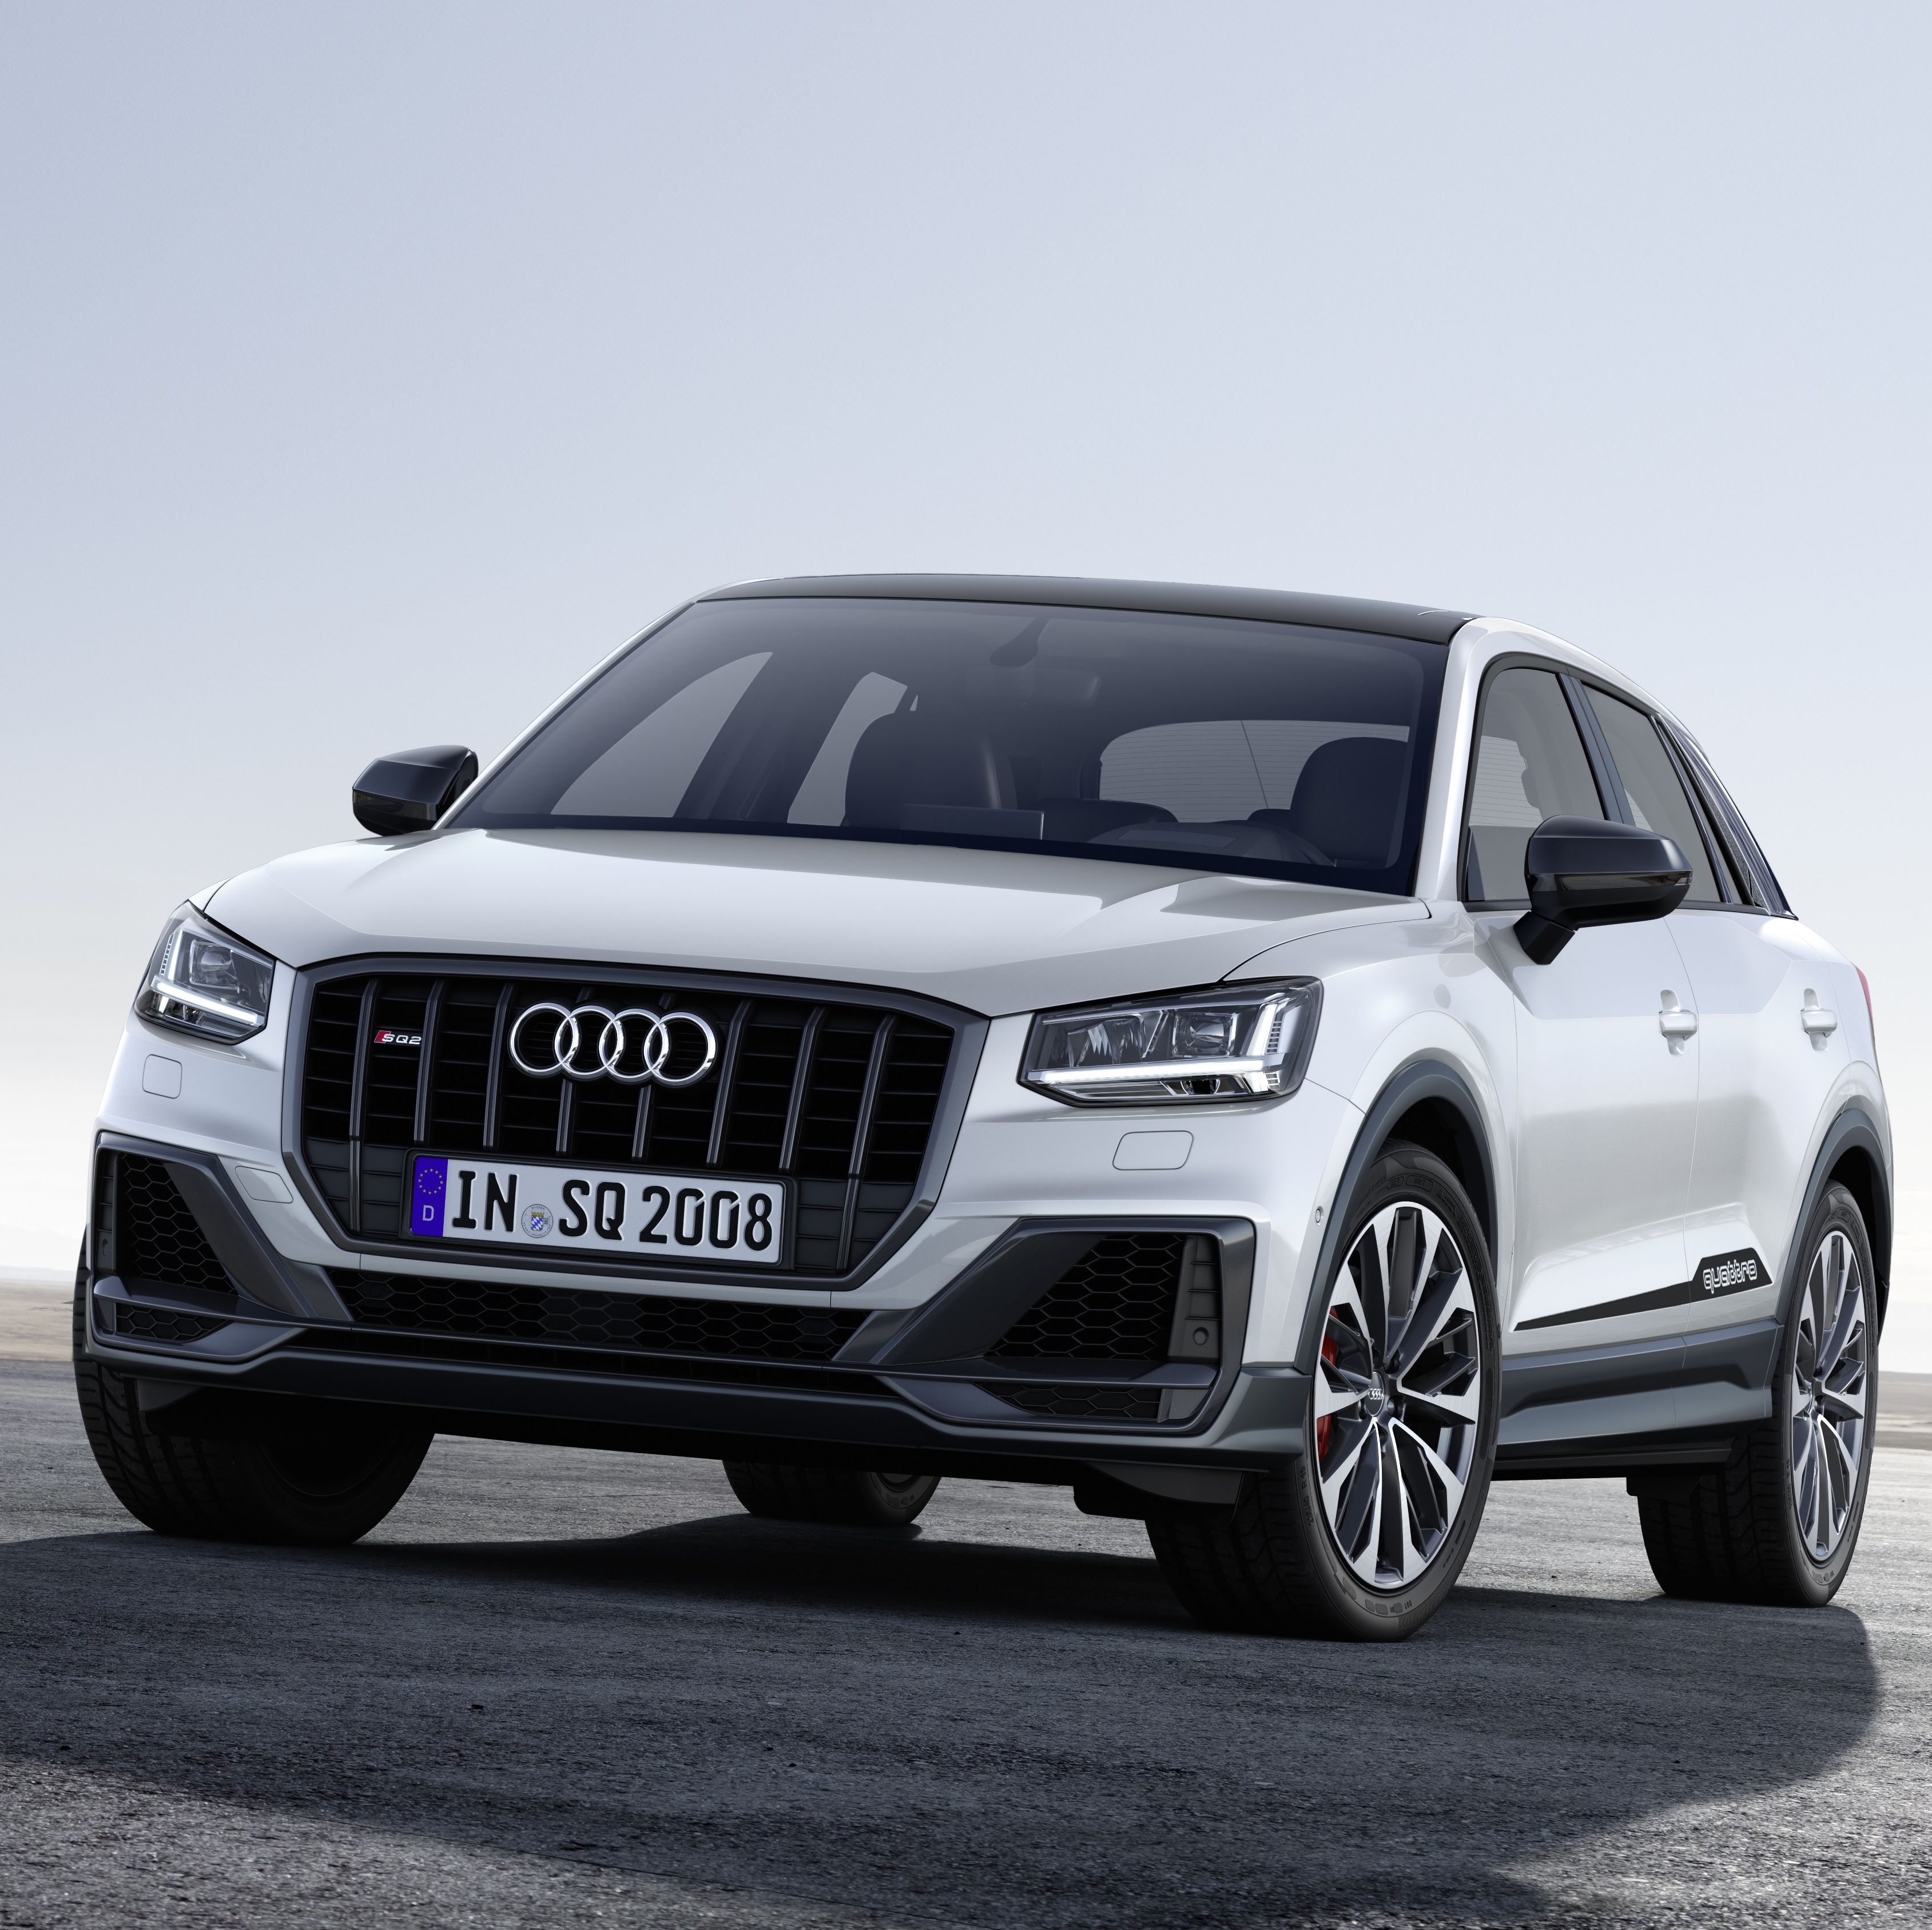 Audi SQ2 revealed: UK release date, prices and specs